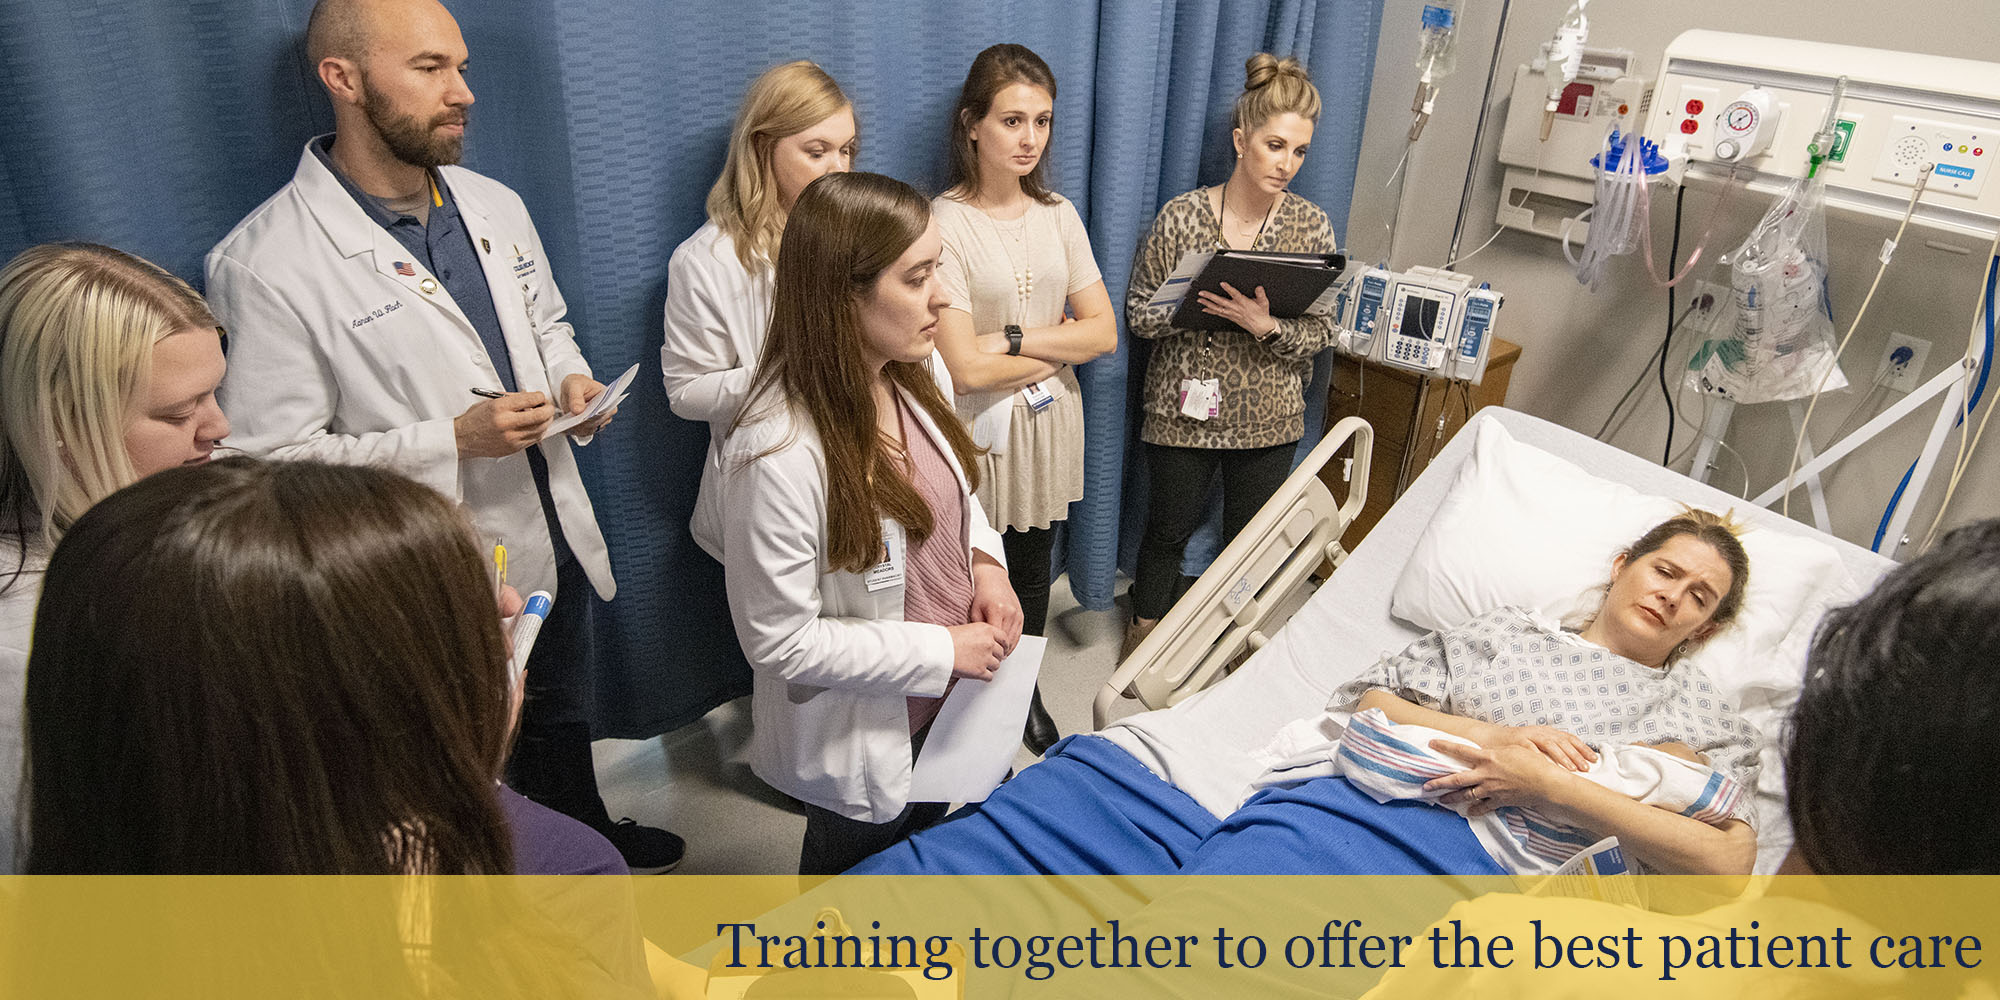 Training together to offer the best patient care